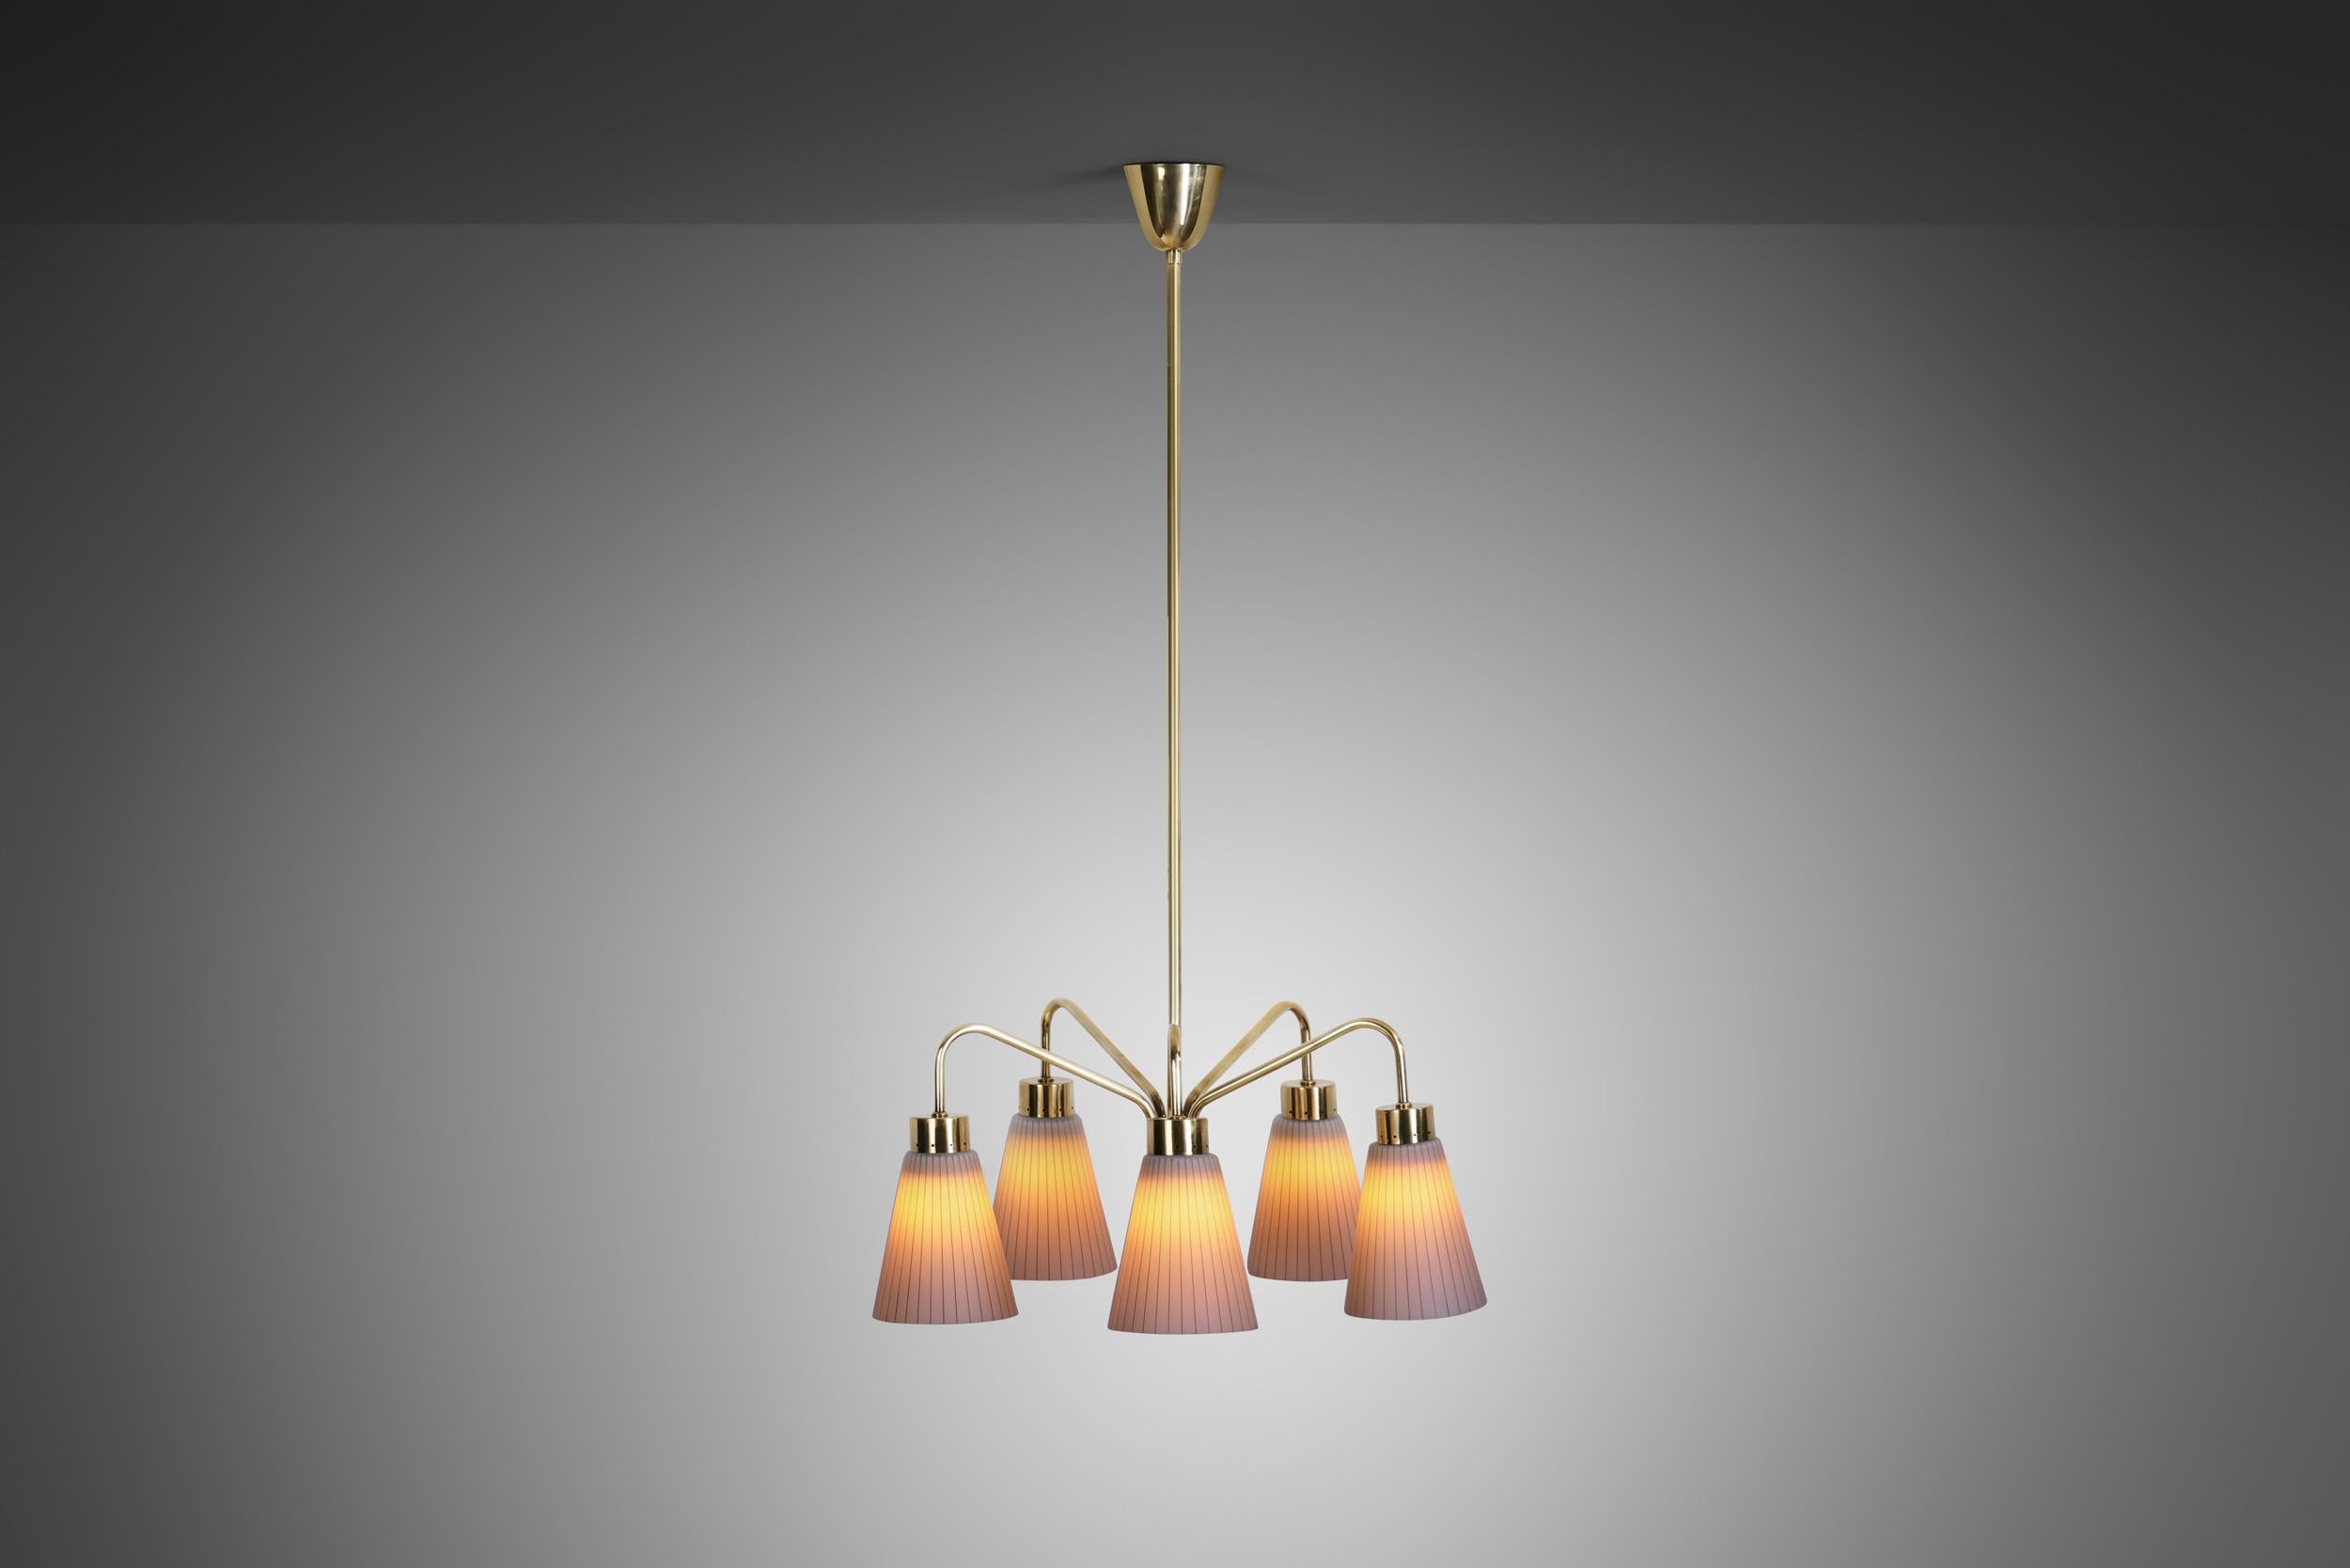 Mid-Century Modern Brass Ceiling Lamp with Striped Glass Shades, Europe ca 1950s For Sale 1